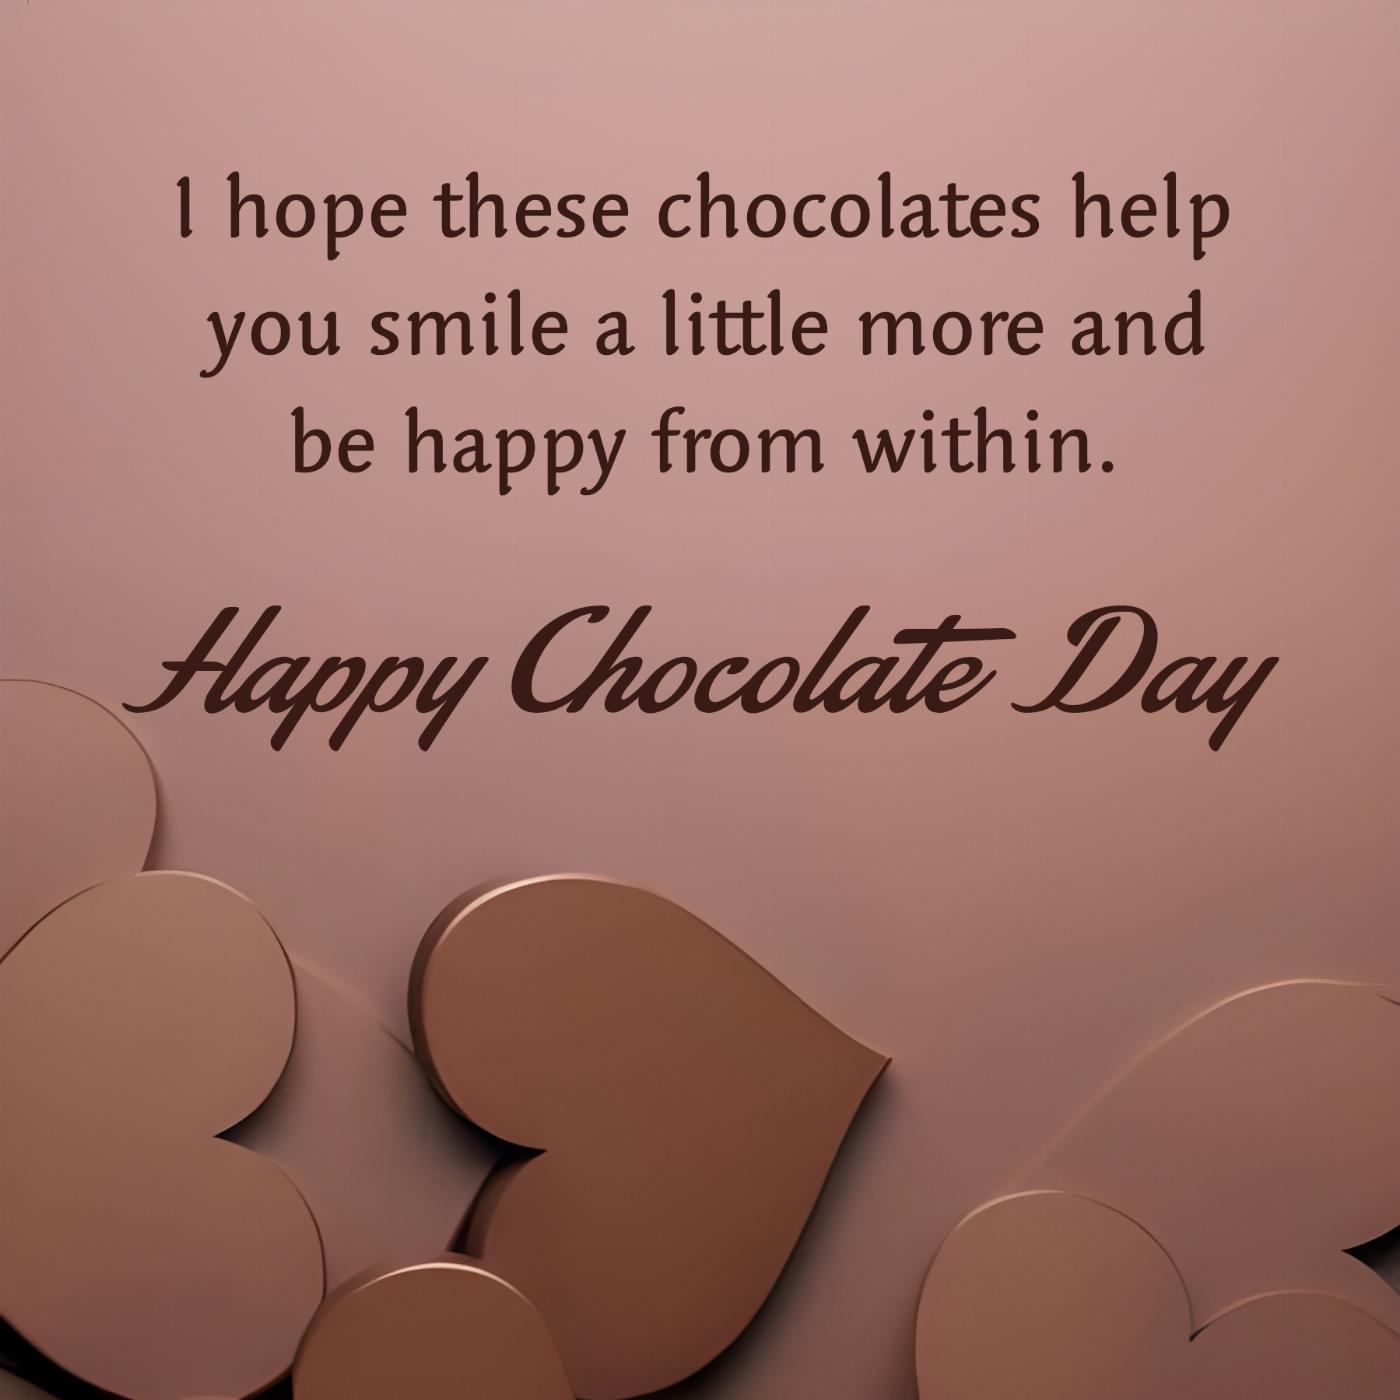 I hope these chocolates help you smile a little more